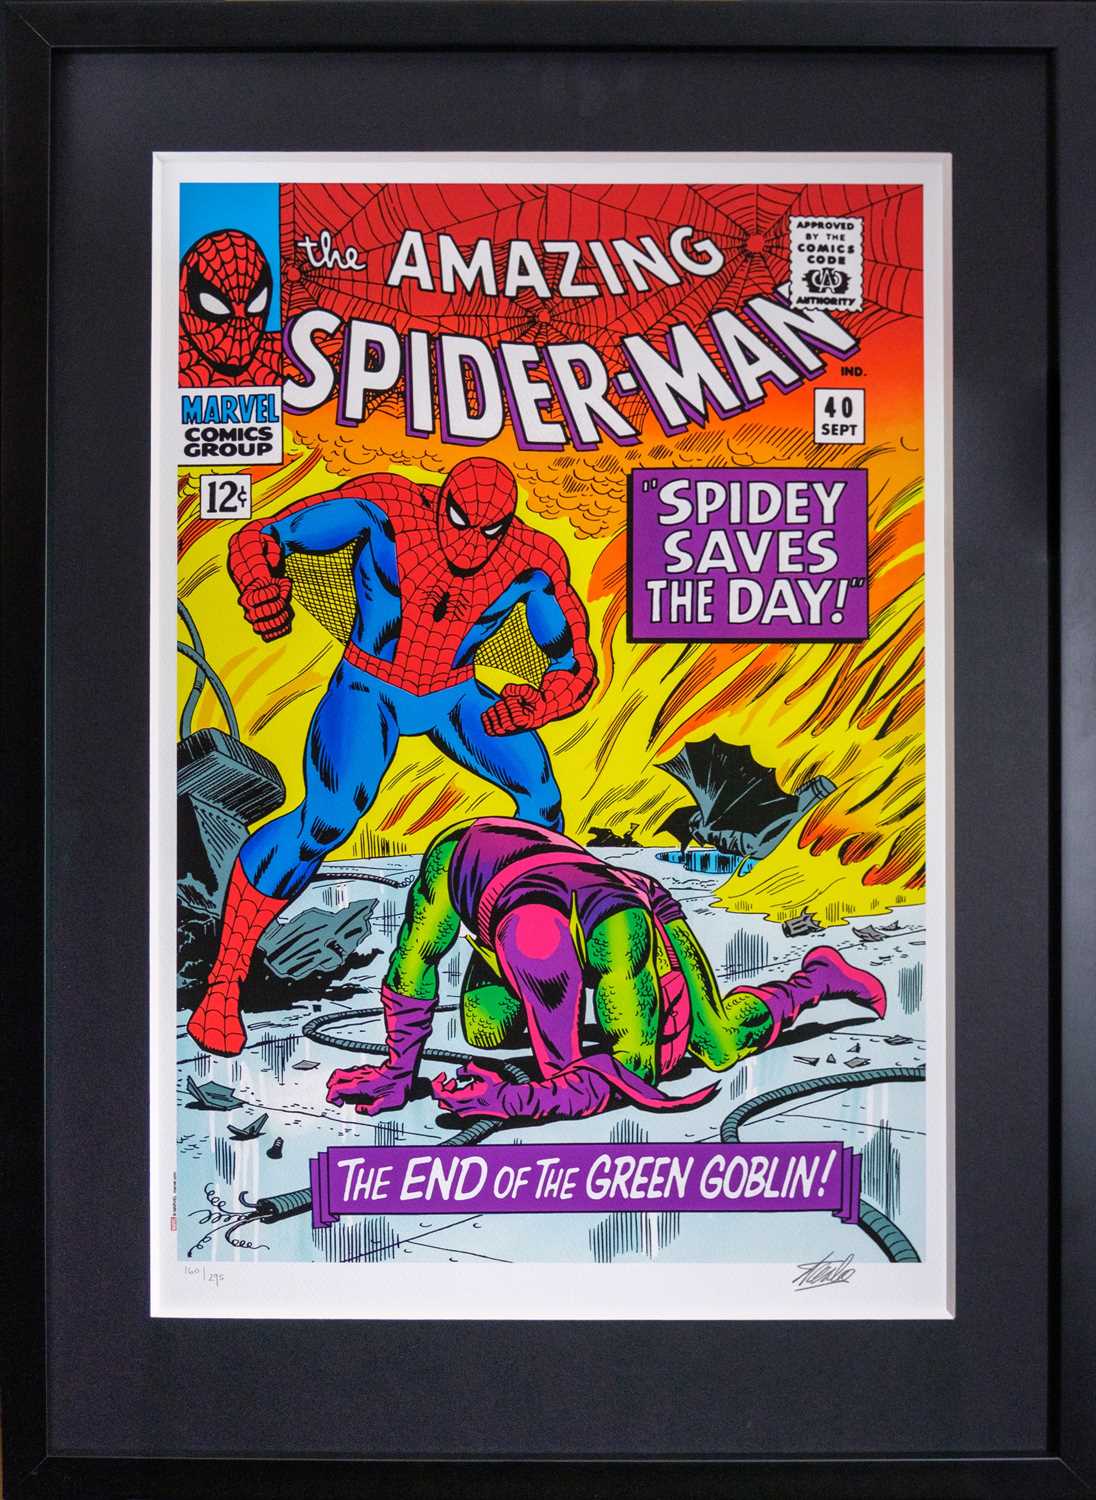 (Signed) Stan LEE (1922-2018) The Amazing Spider-Man #40 - Spidey Saves The Day (2016) - Image 2 of 5